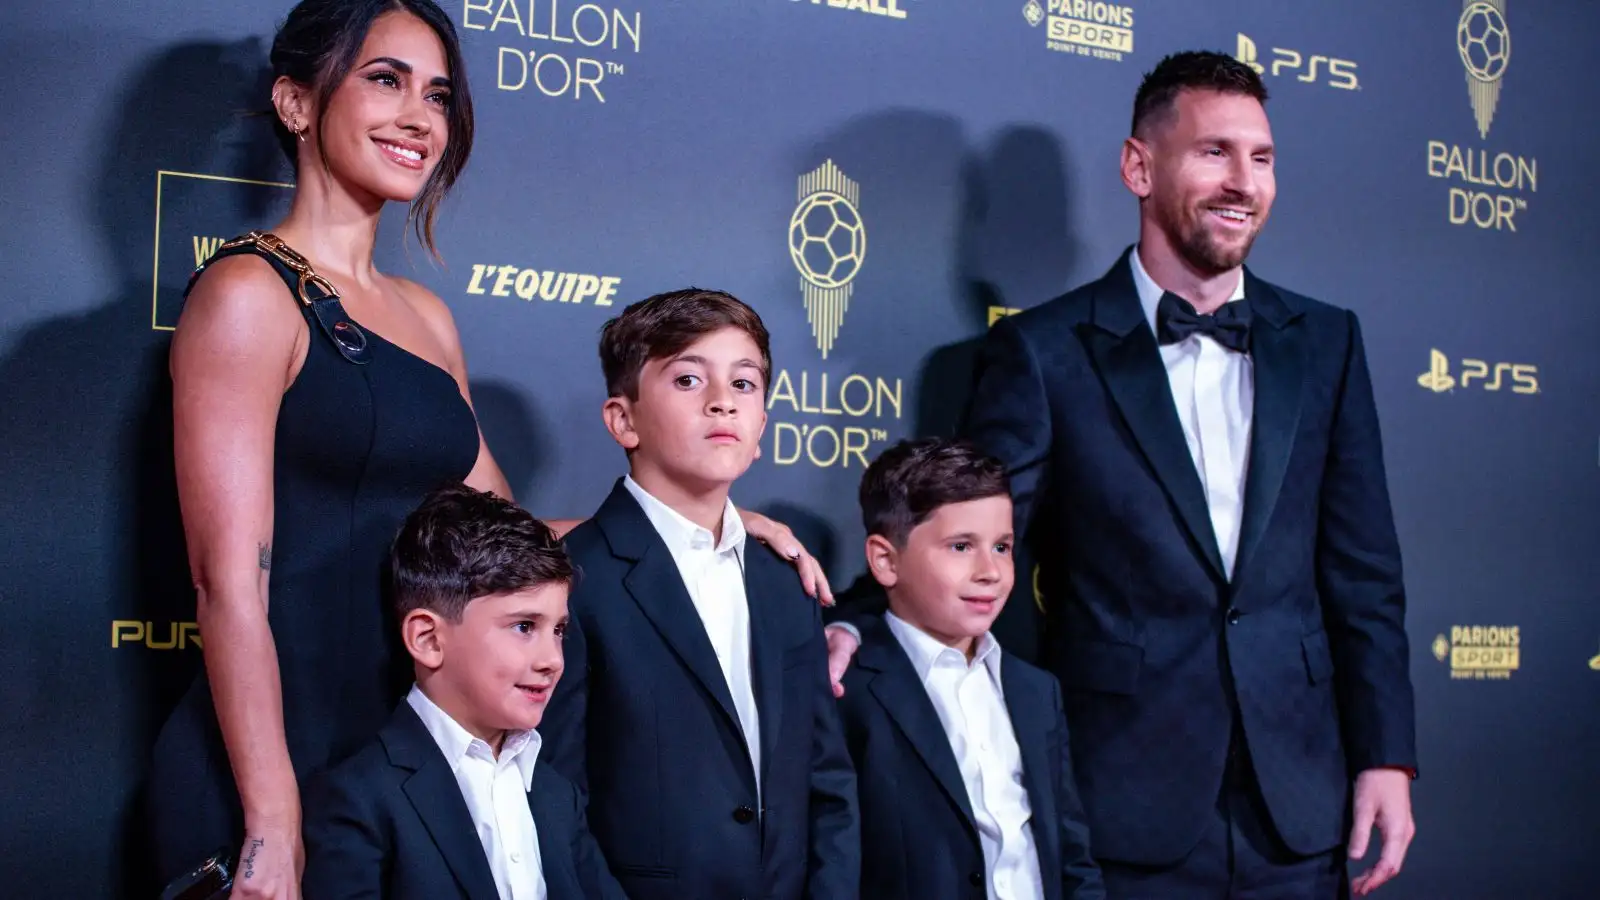 Lionel Messi with wife Antonela Roccuzzo and also their offspring during the red carpet ceremony of the Ballon d'Or.